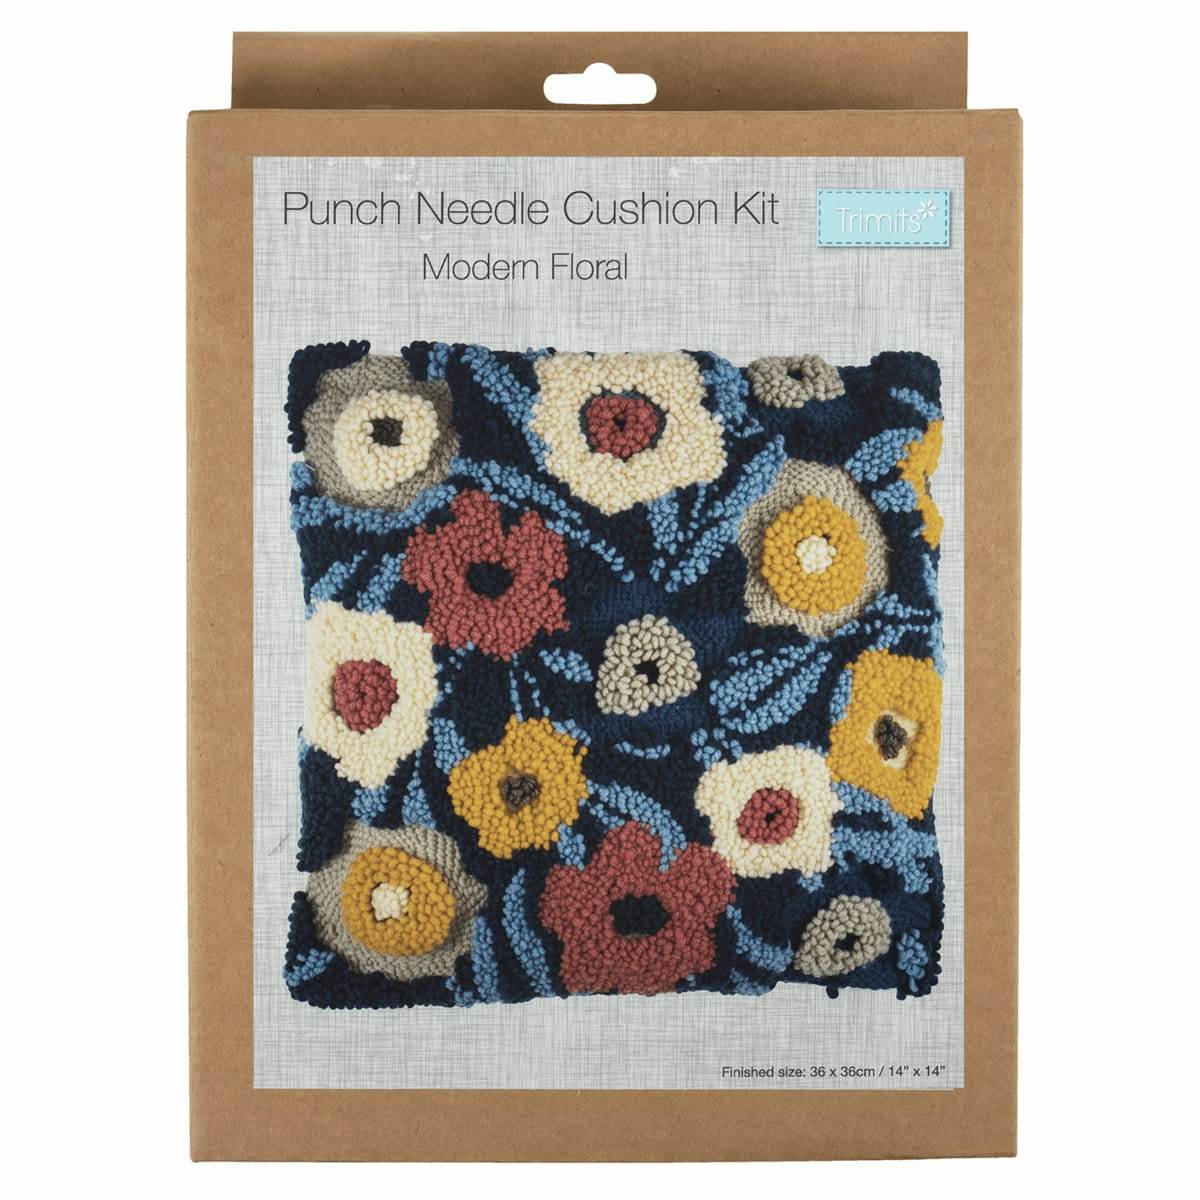 Trimits Punch Needle Kit Cushion: Modern Floral